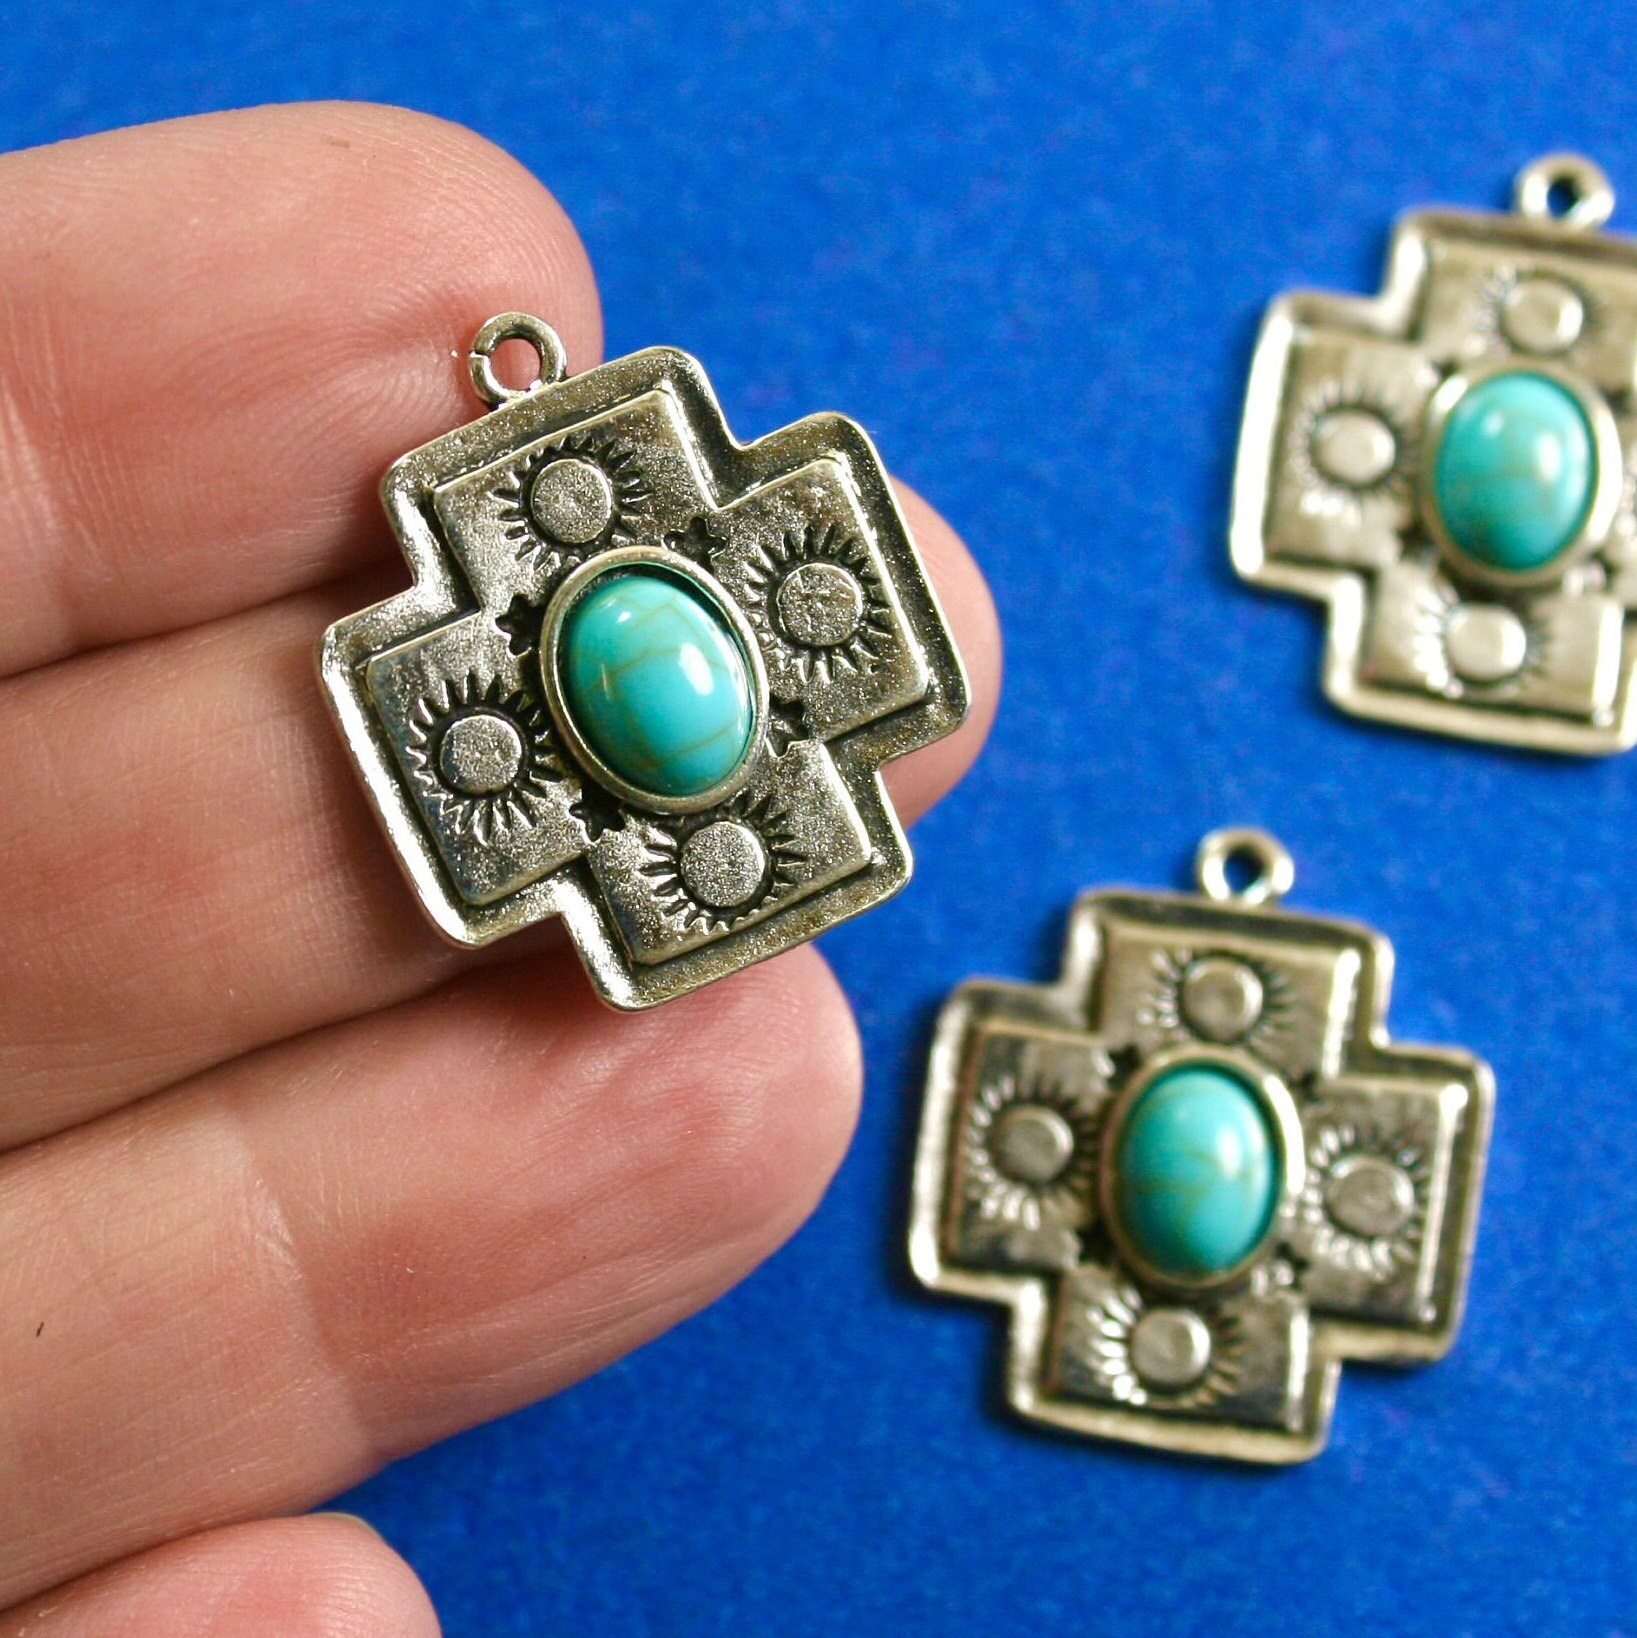 NVENF 32pcs Western Charms for Jewelry Making, Synthetic Turquoise Charms Vinta